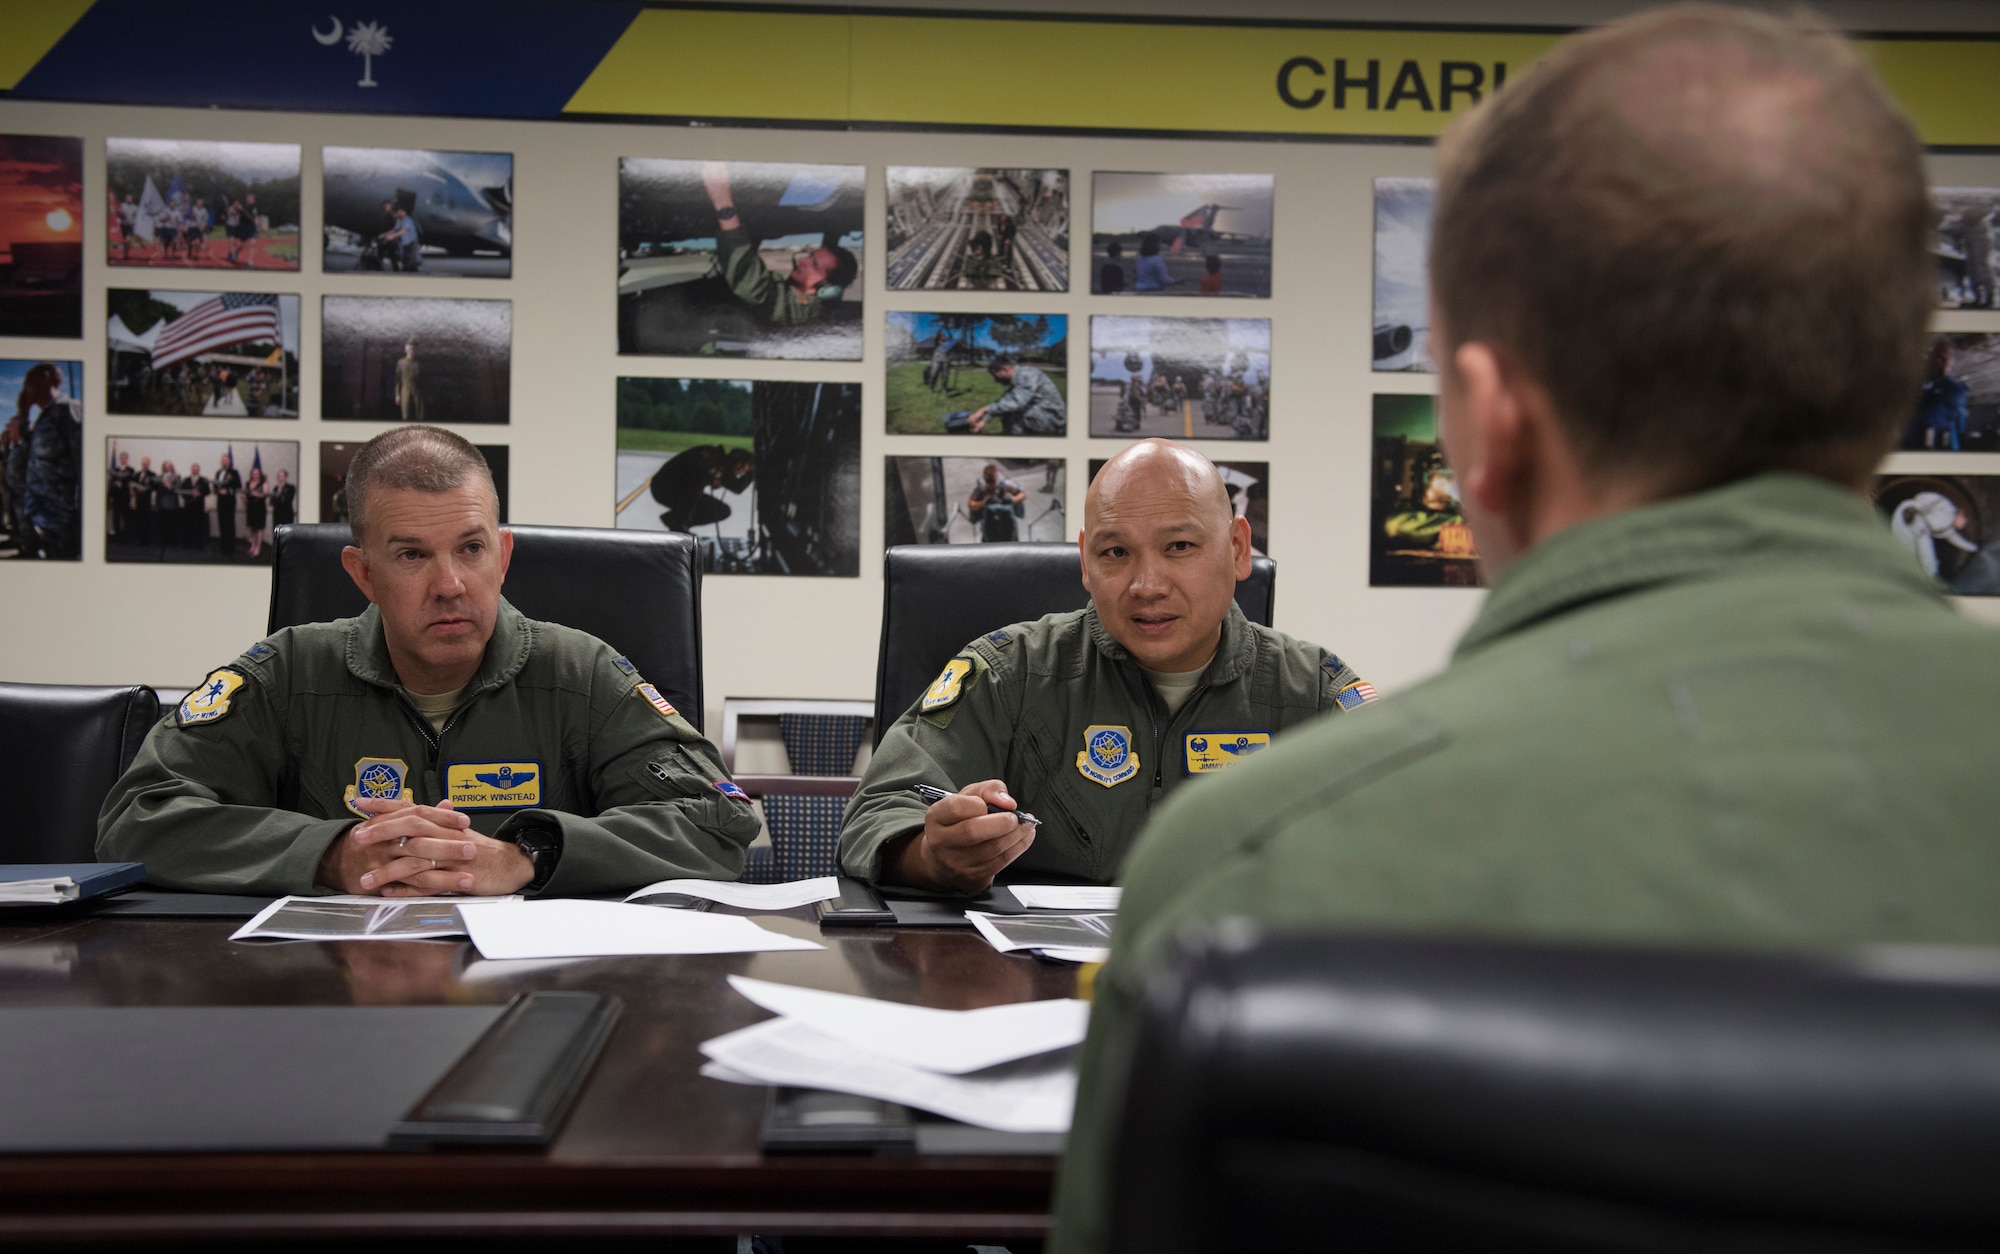 Col. Patrick Winstead, left, 437th Airlift Wing vice commander, and Col. Jimmy Canlas, middle, 437th Airlift Wing commander, discuss a proposal to enhance runway operations at North Auxiliary Airfield, North, S.C., with Maj. Ron Howard, 437th Operations Squadron assistant director of operations, during the Squadron Innovation Fund panel meeting June 4, 2018.